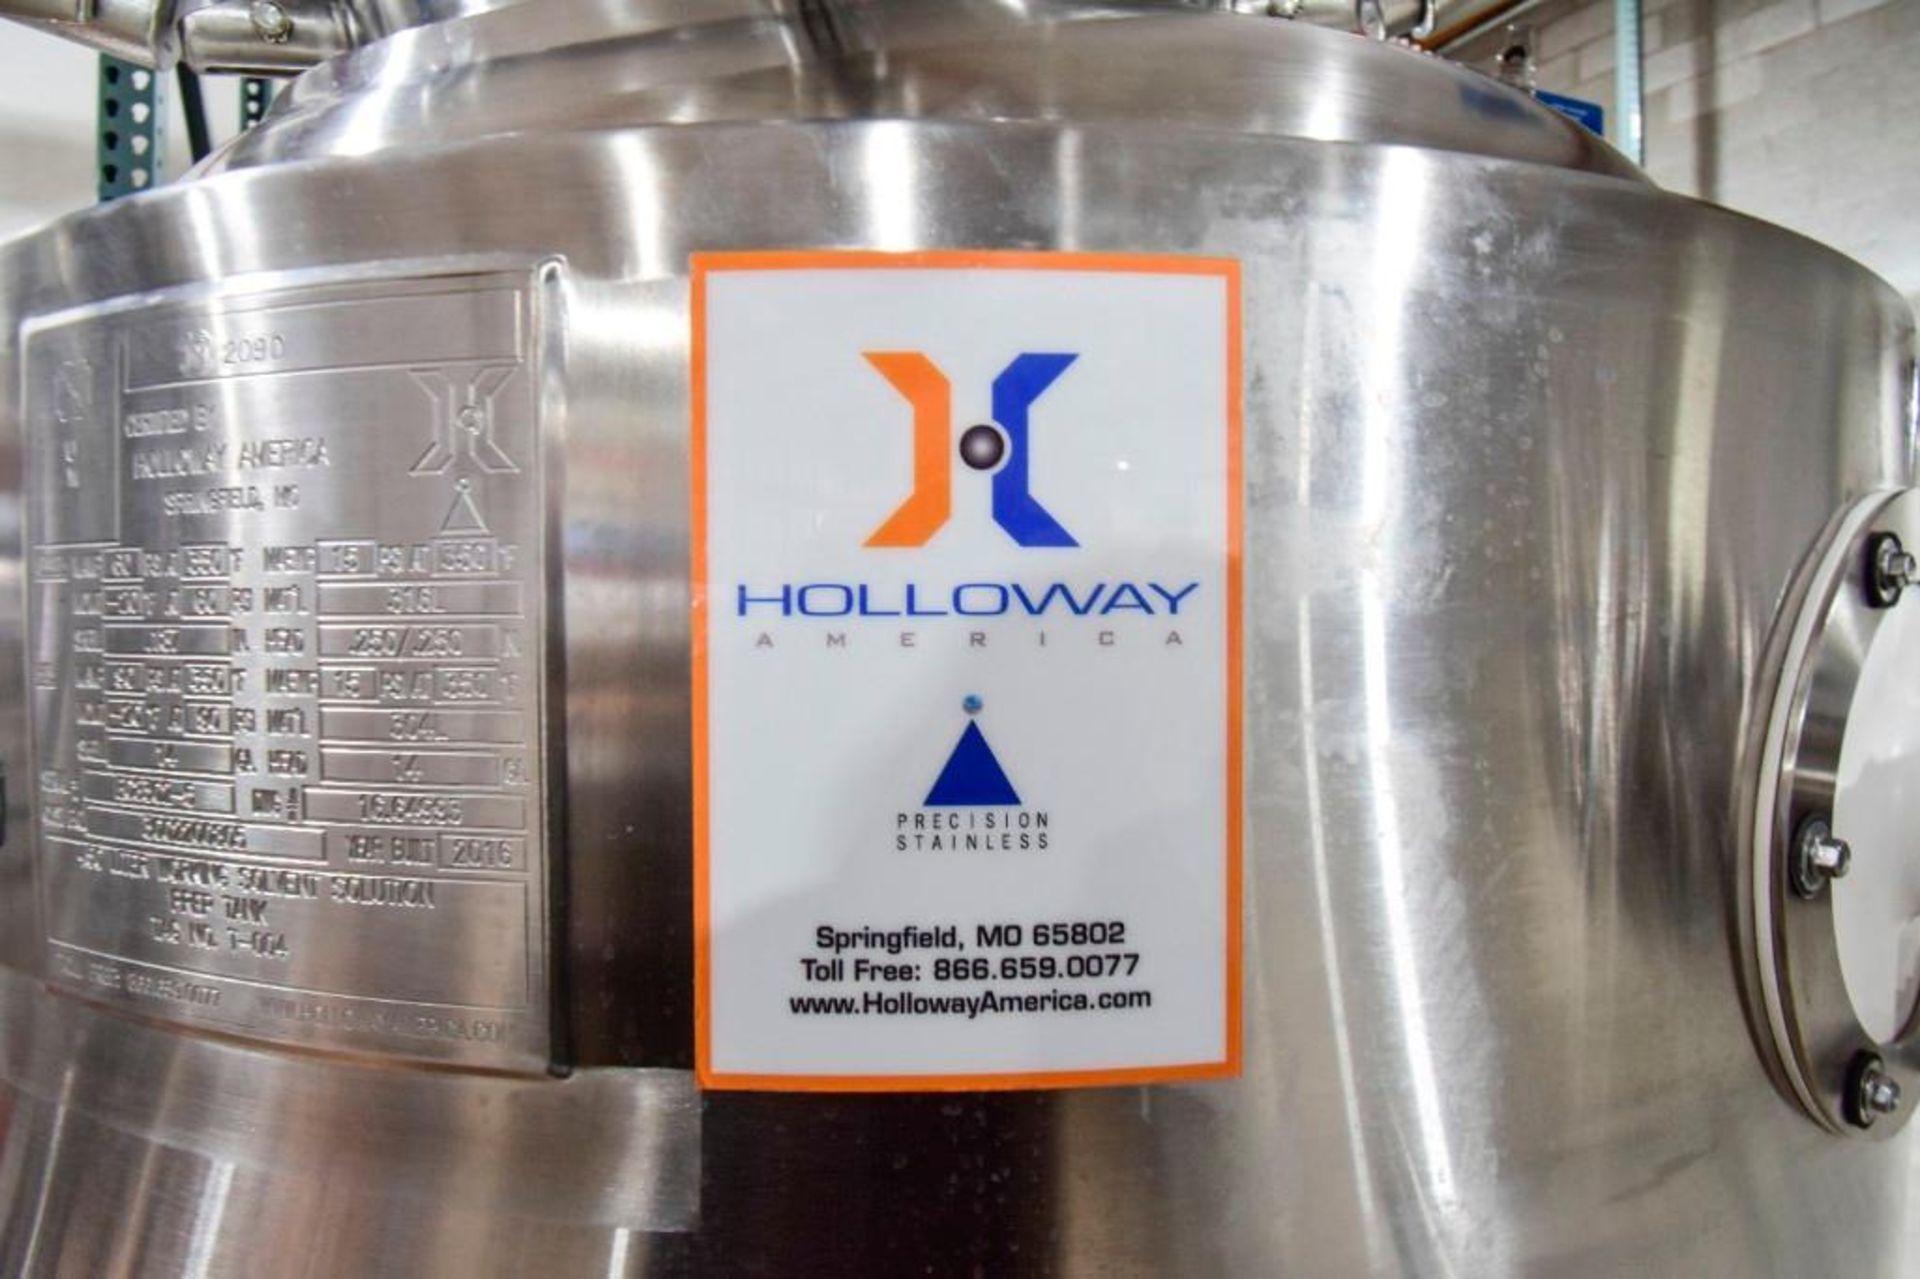 Holloway America Precision 450 L Stainless Steel Mixing Tank on Casters - Image 7 of 10